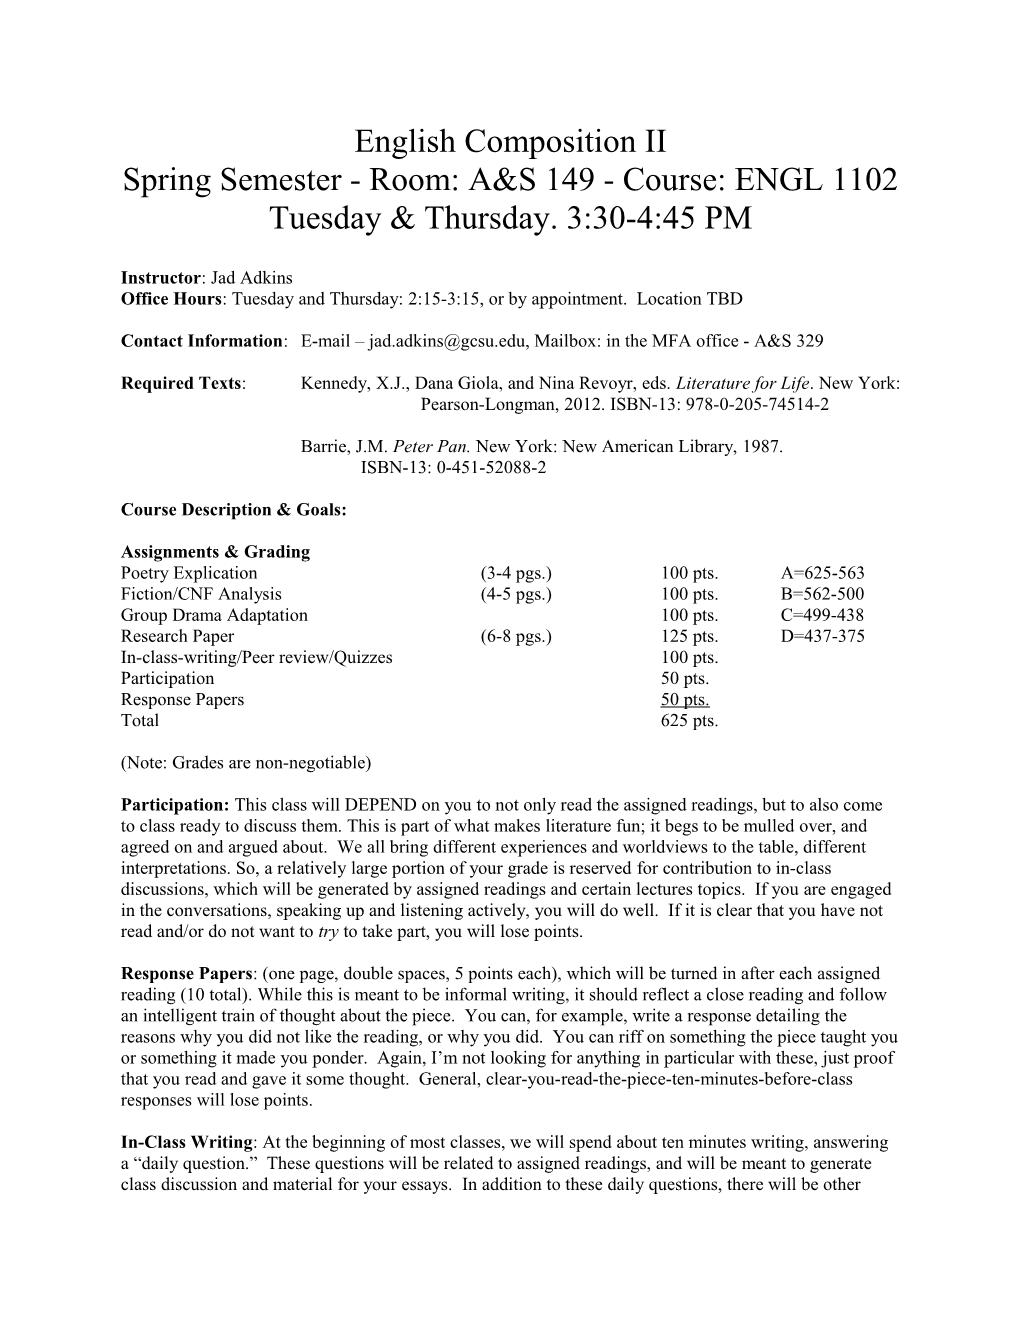 Spring Semester - Room: A&S 149 - Course: ENGL 1102